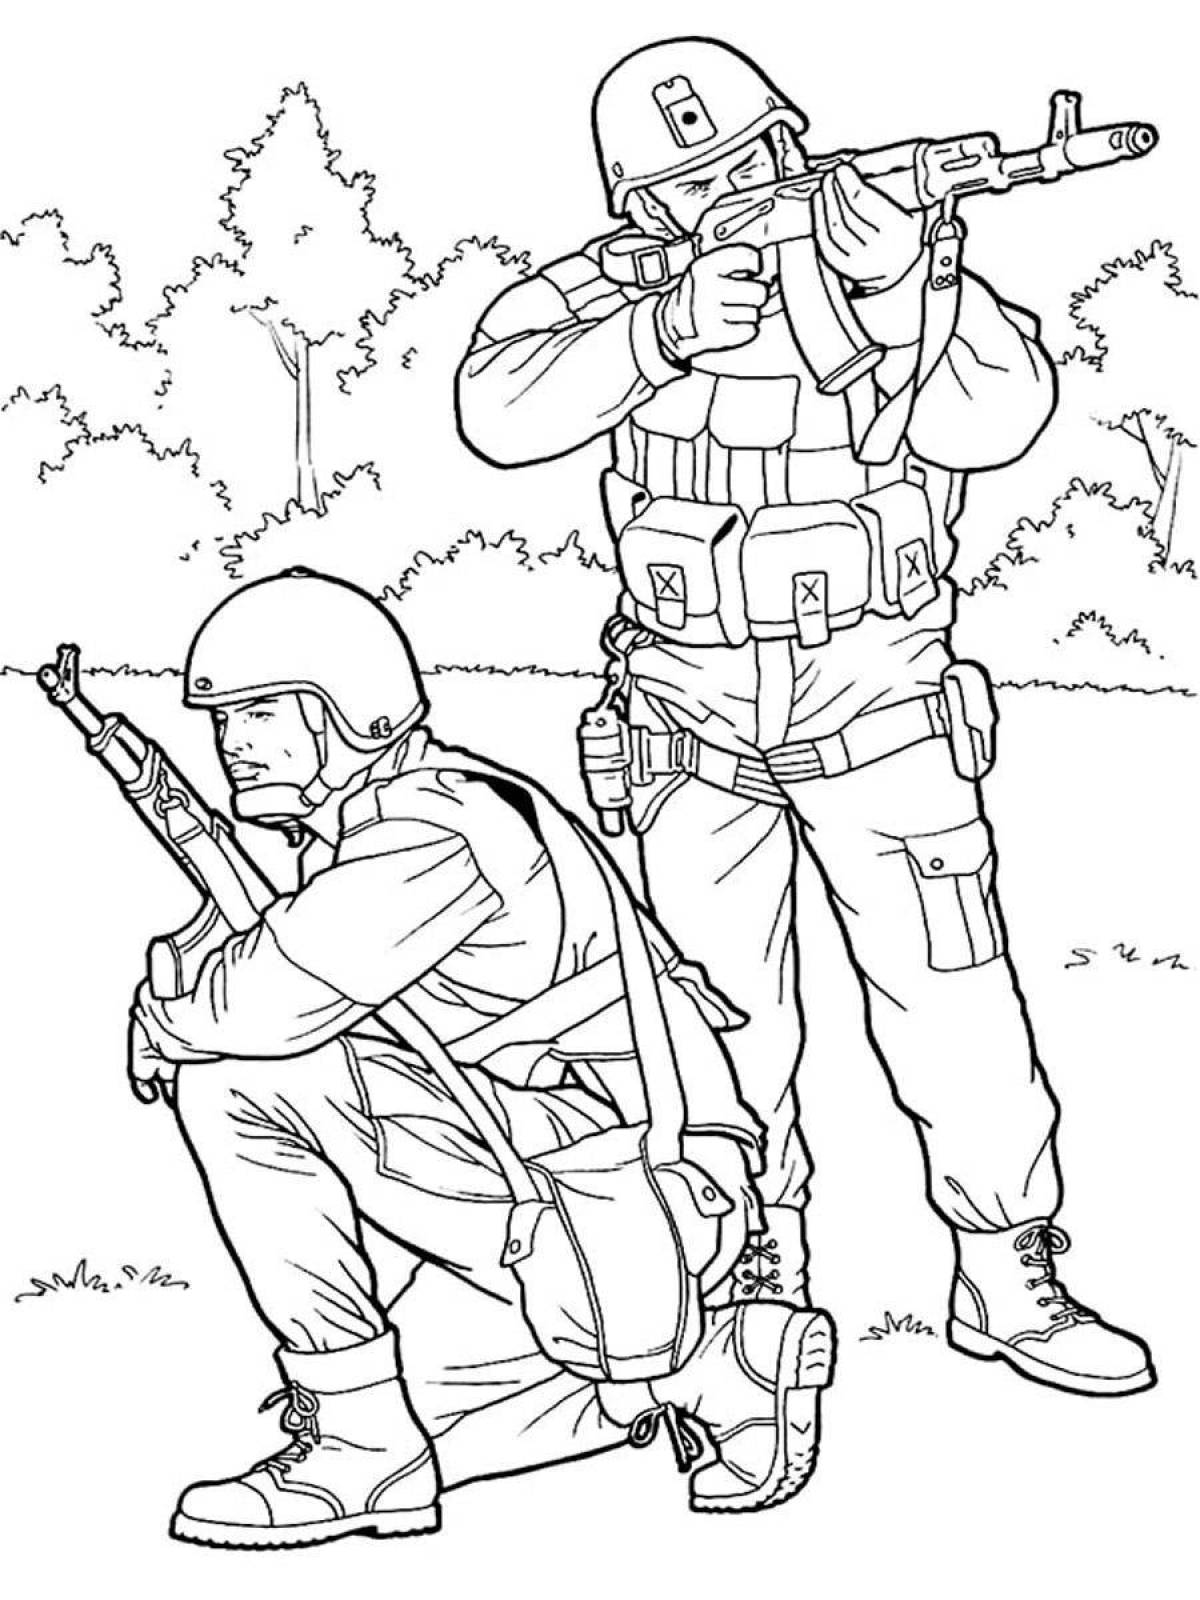 Coloring page amazingly famous Russian soldier